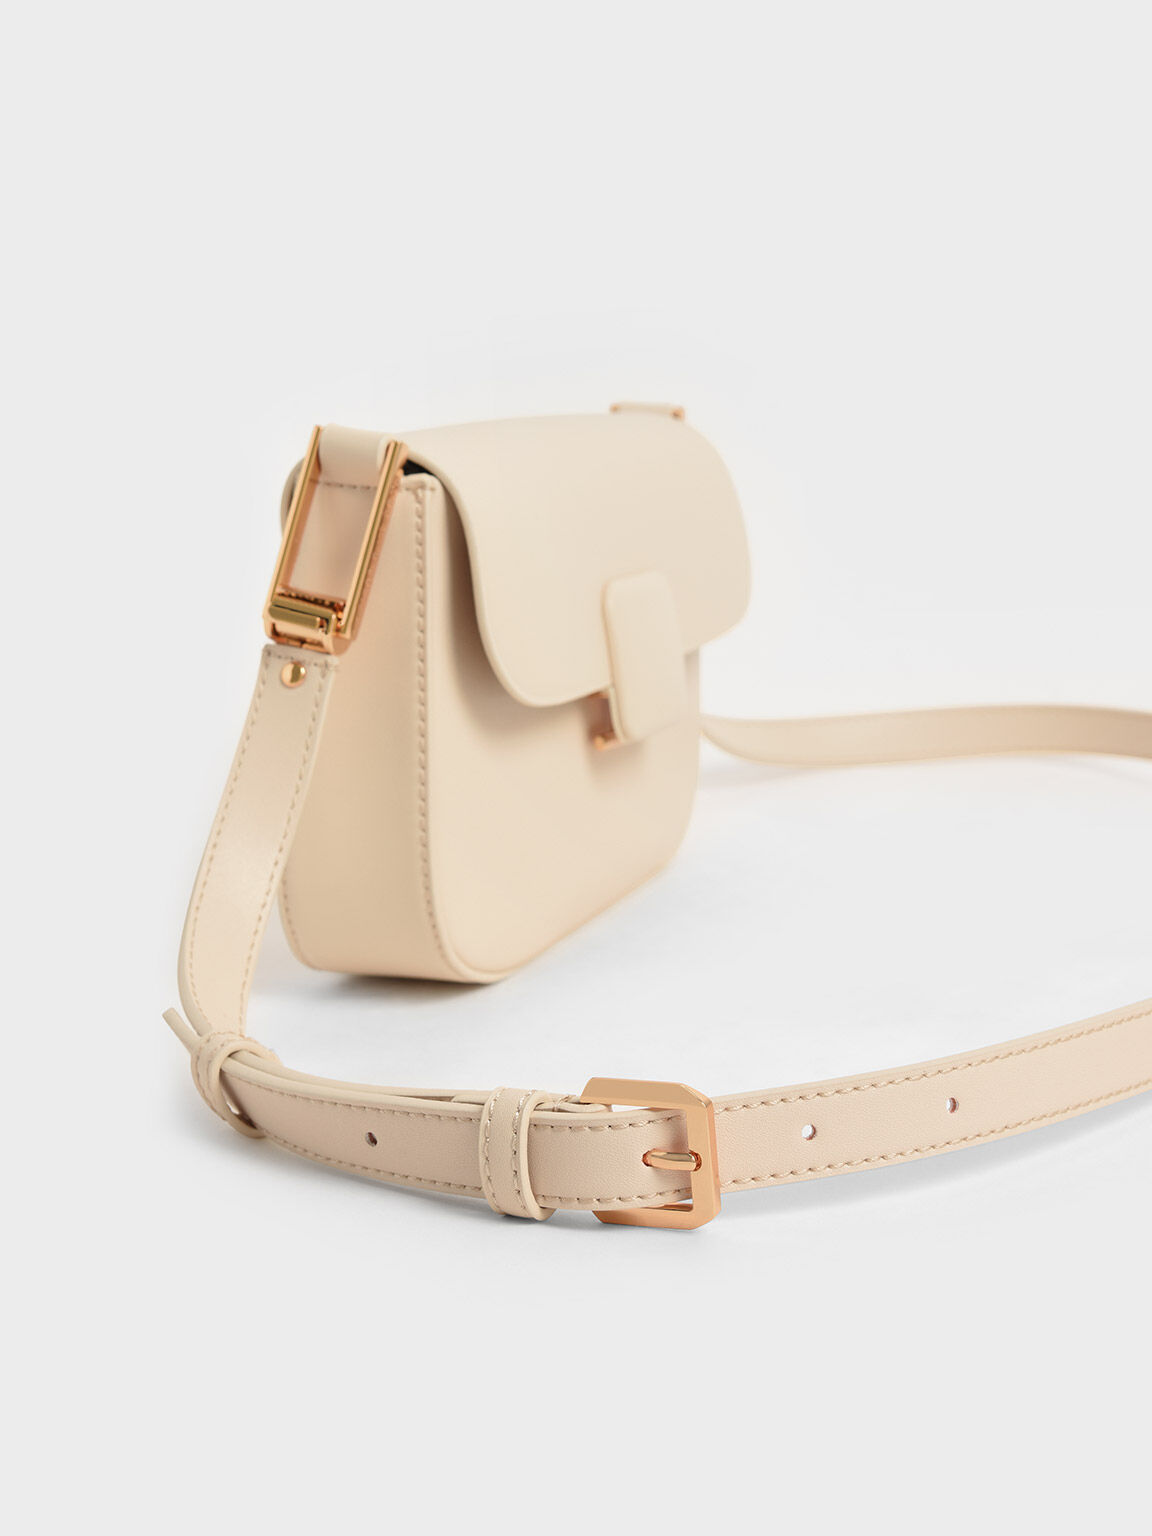 Women’s Online Exclusive Shoes, Bags & Accessories - CHARLES & KEITH SG